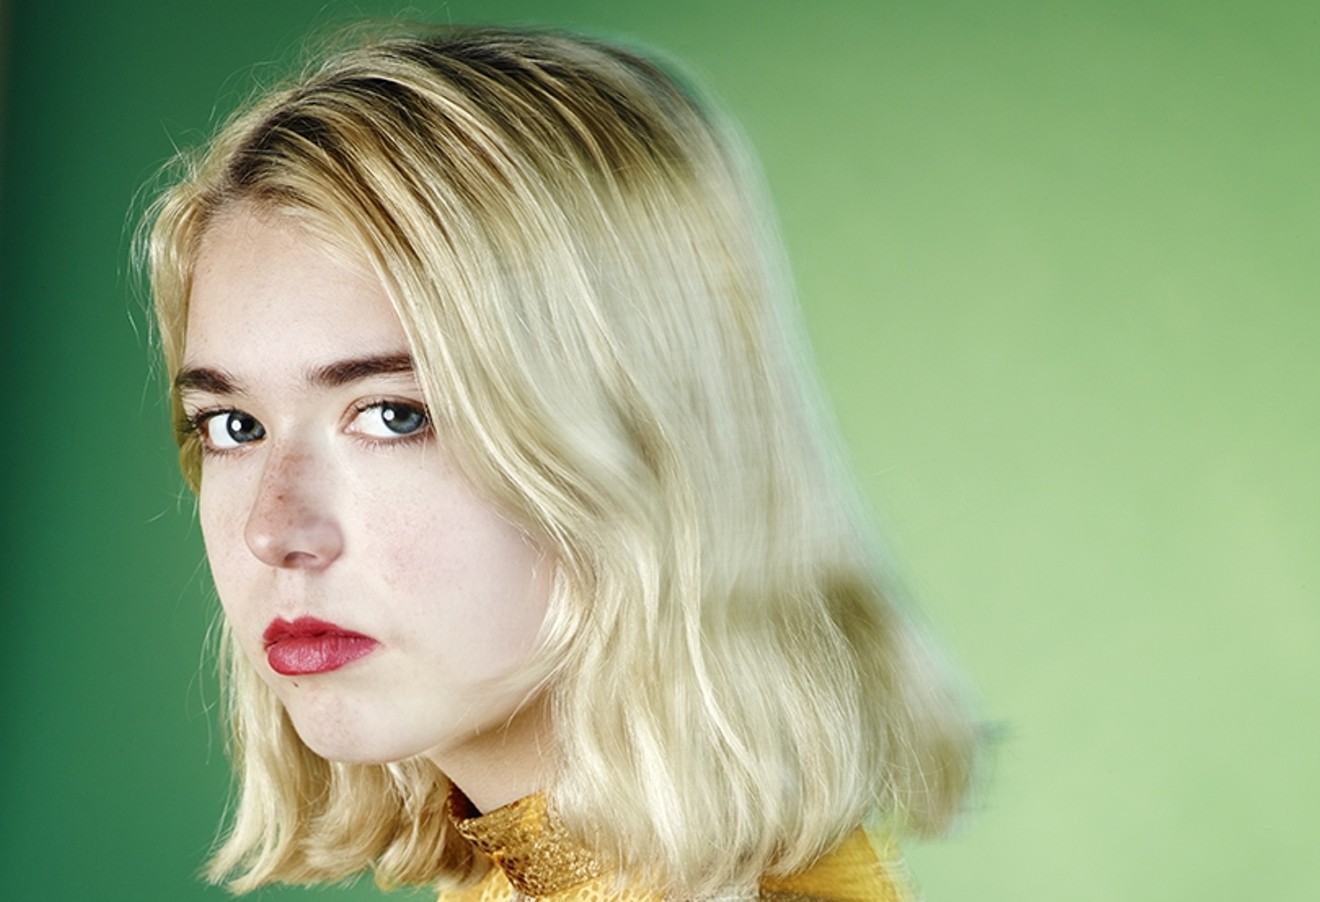 Snail Mail is scheduled to perform on Tuesday, July 3, at Pub Rock Live in Scottsdale.